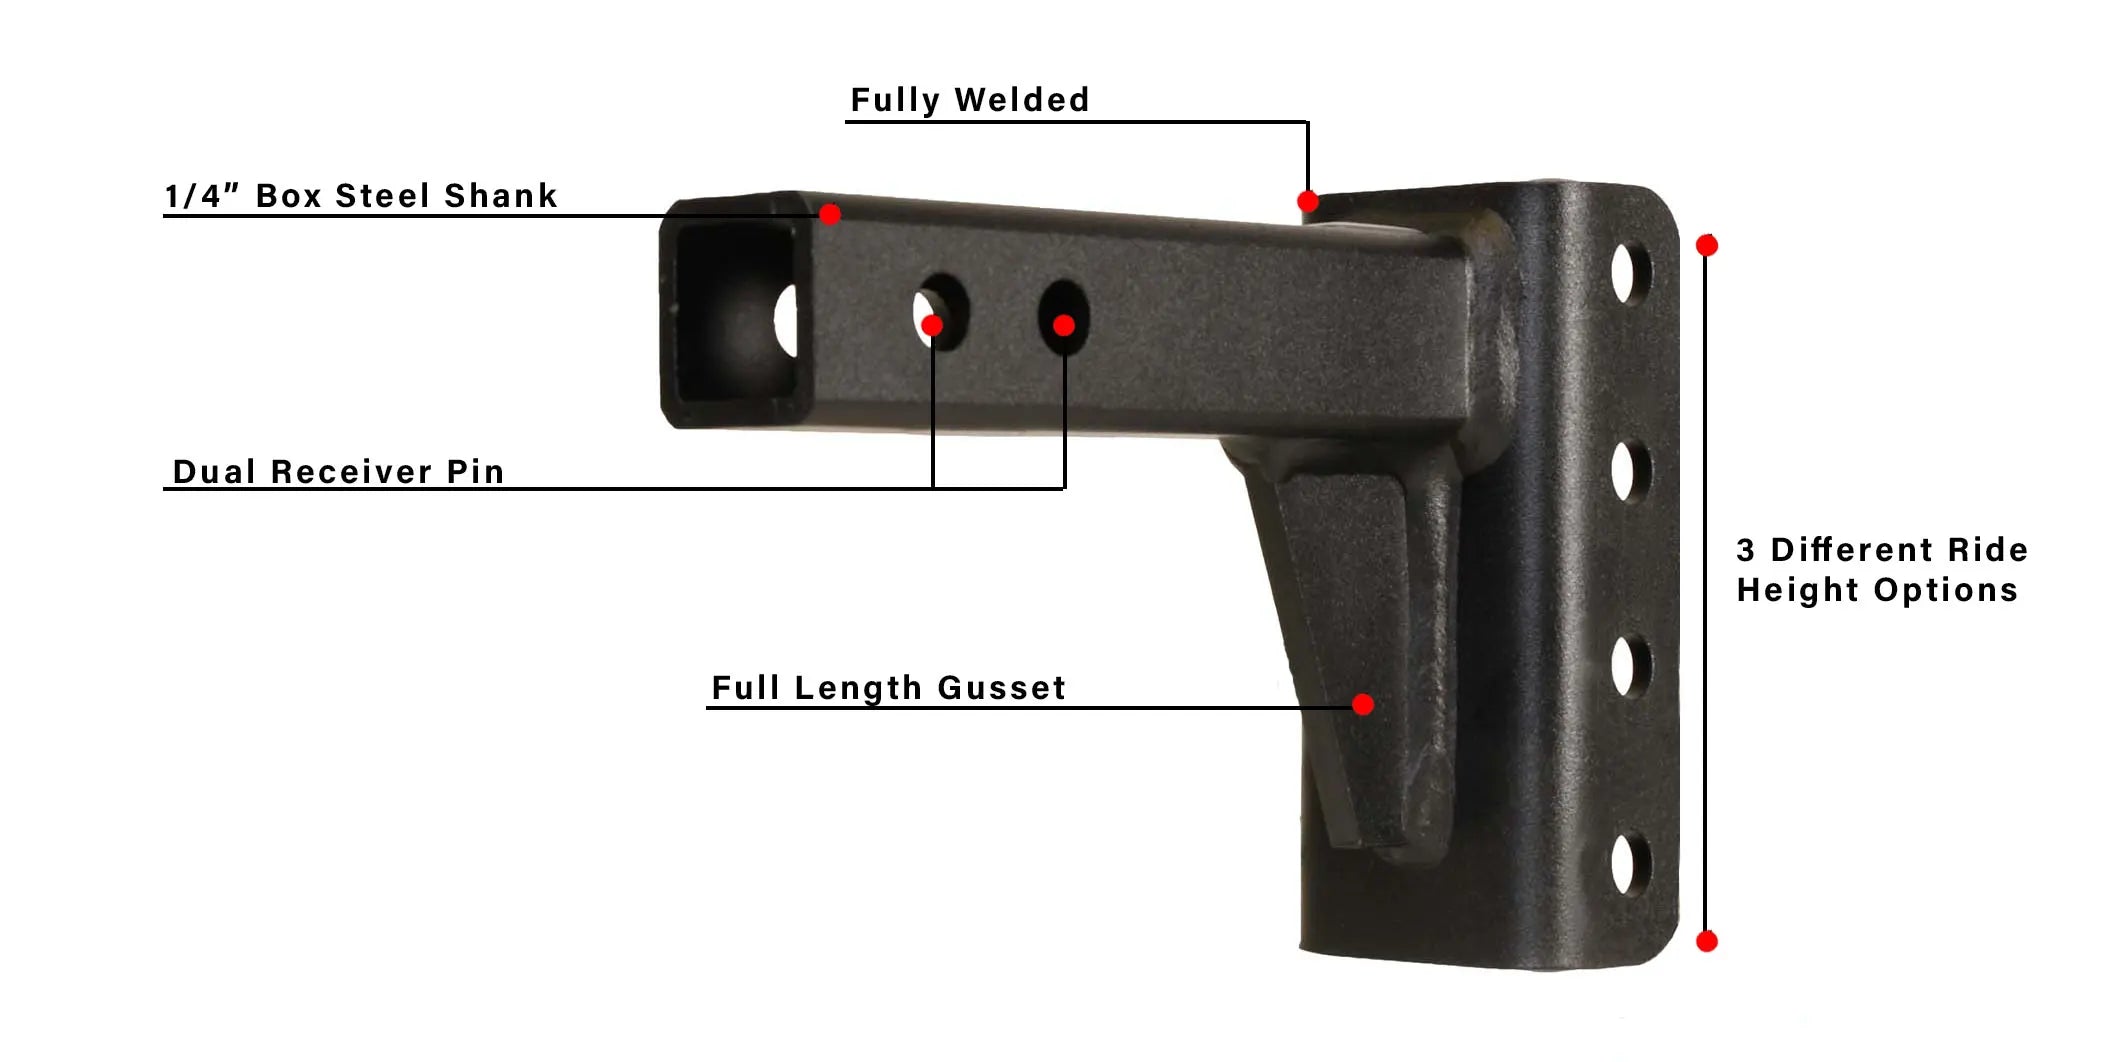 Features of BulletProof Hitches BOX Steel Shank